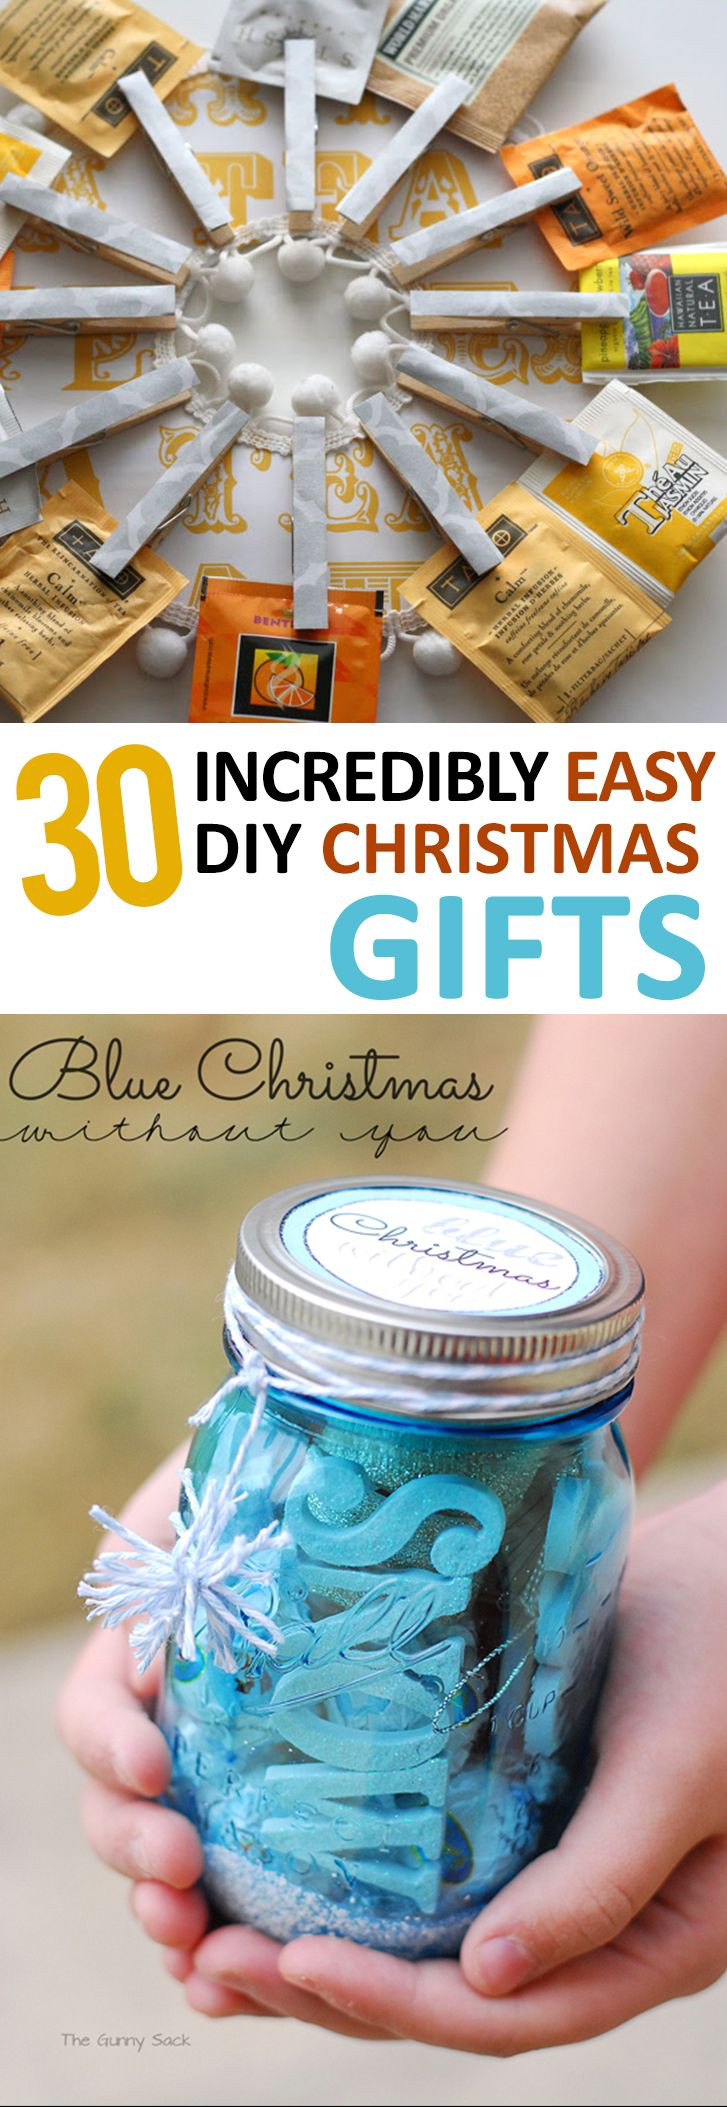 DIY Christmas Gift For Her
 72 best images about Gift Ideas on Pinterest